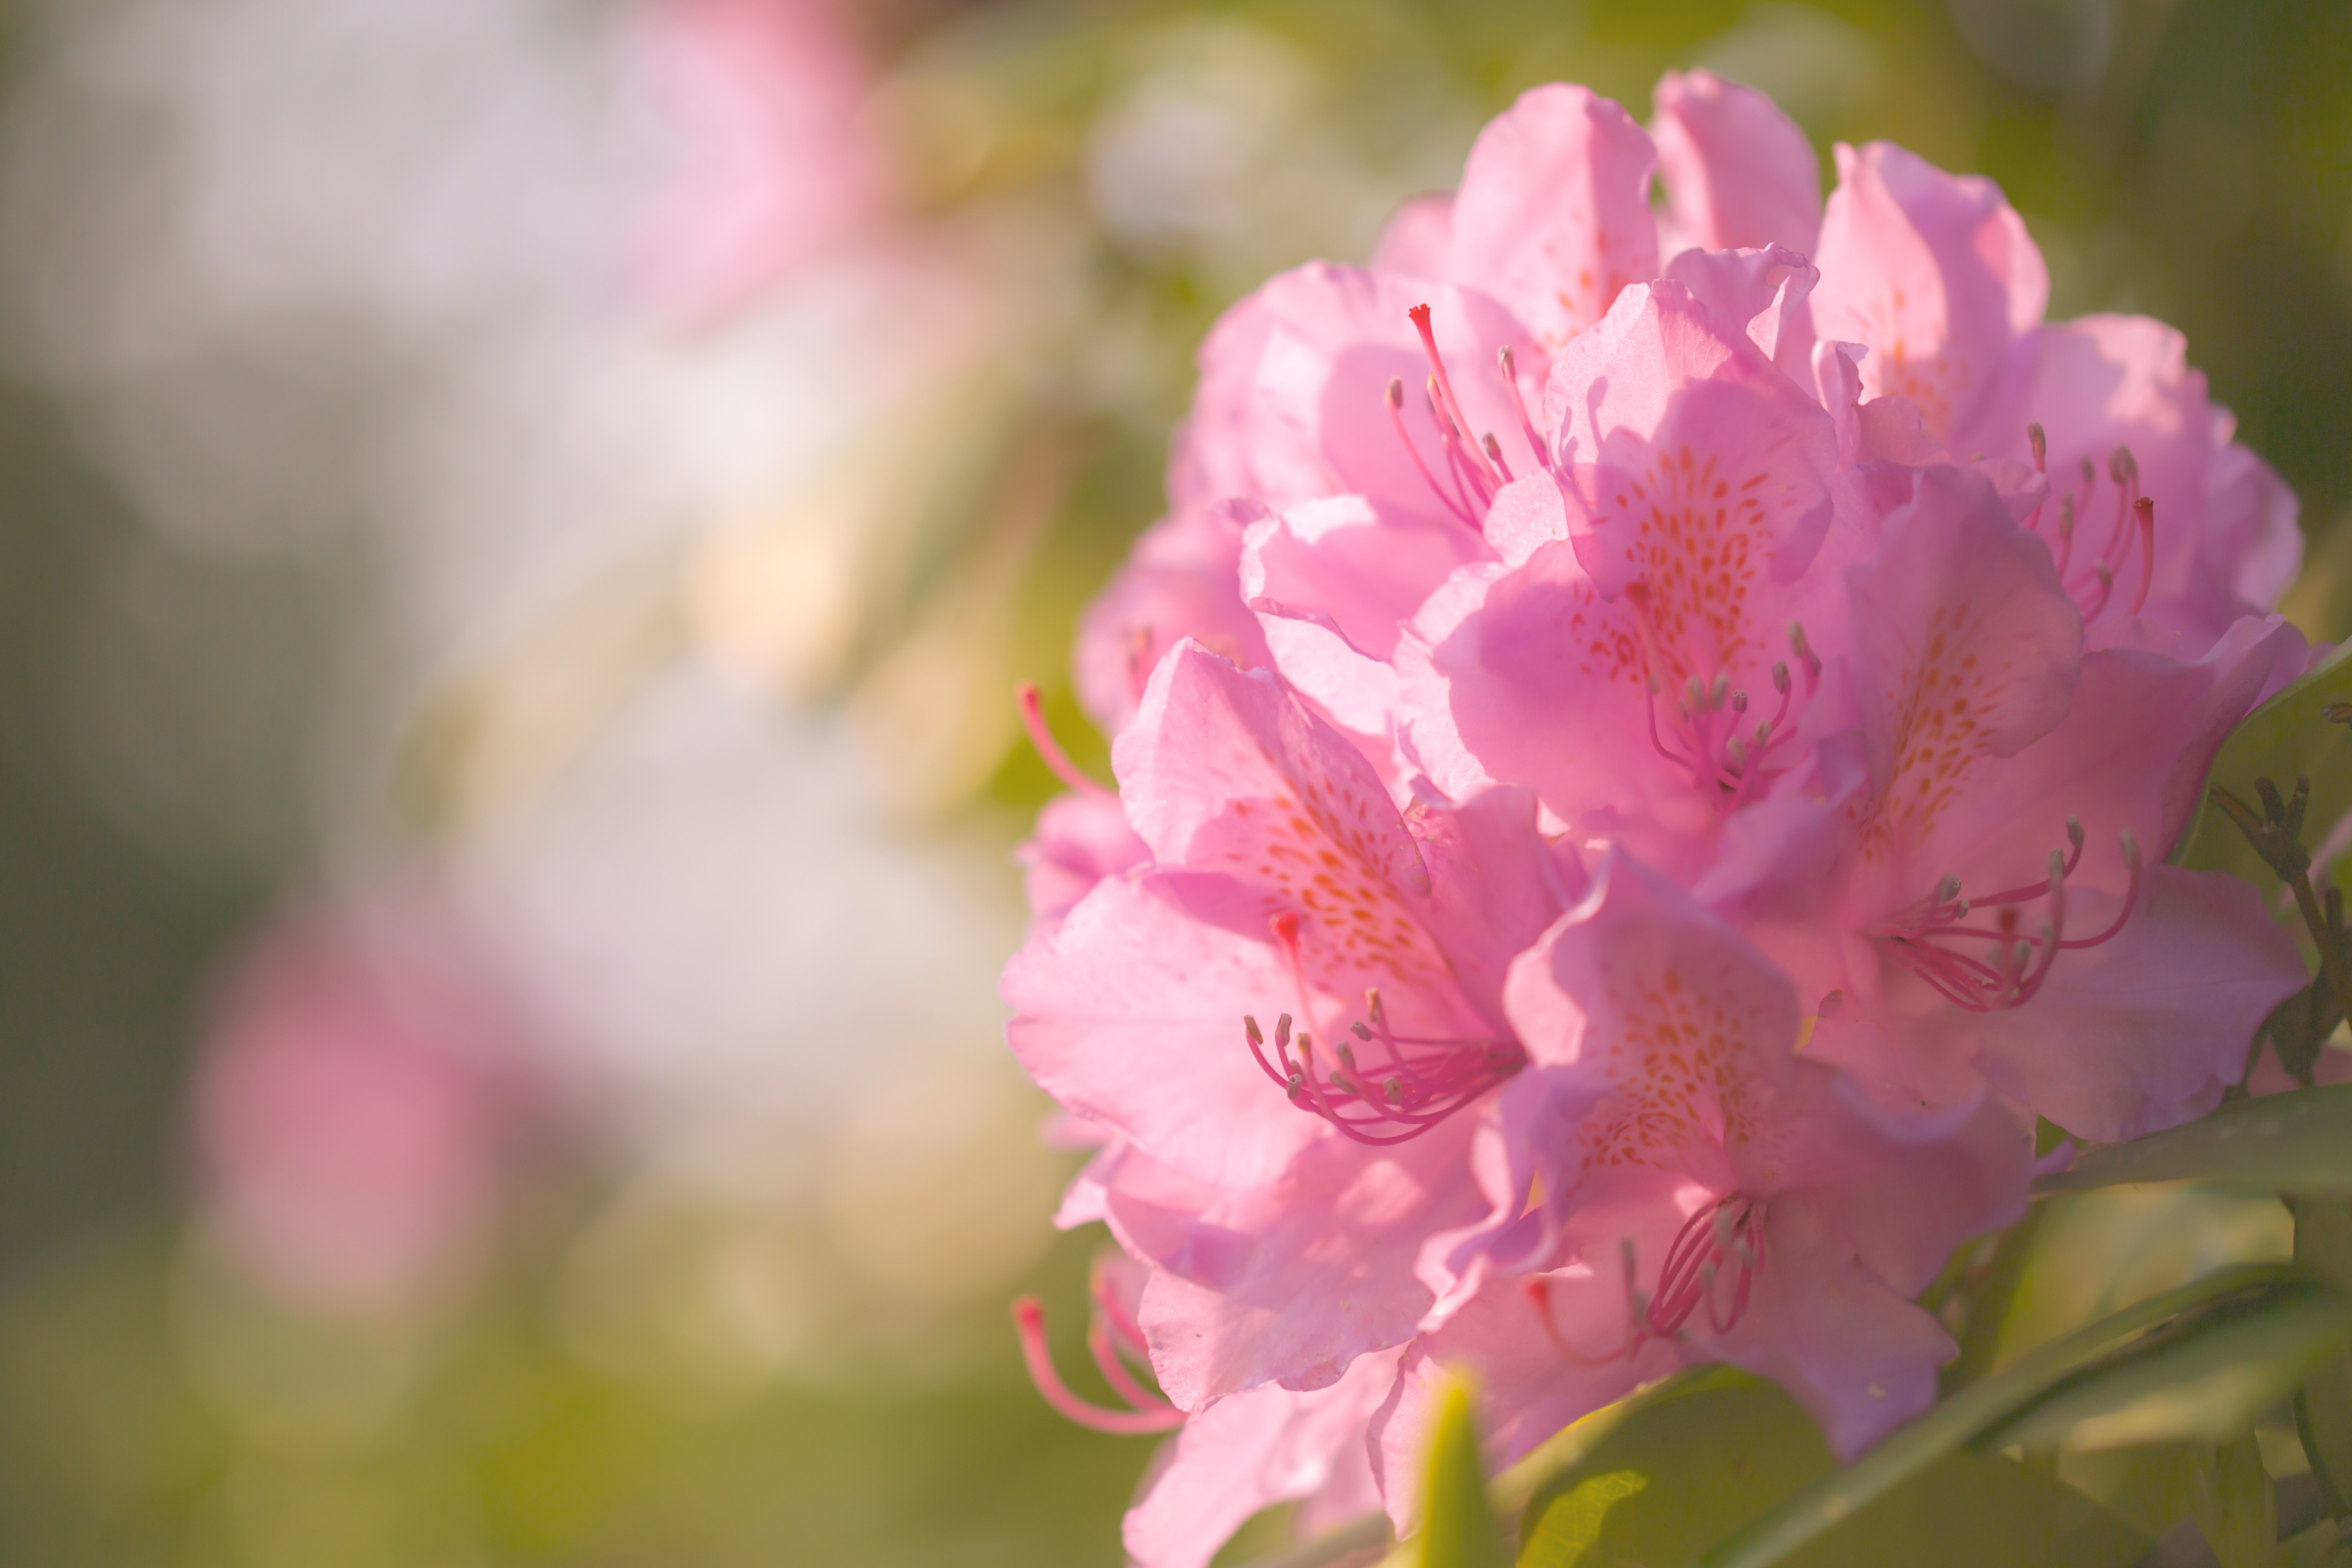 Rhododendron Wallpapers